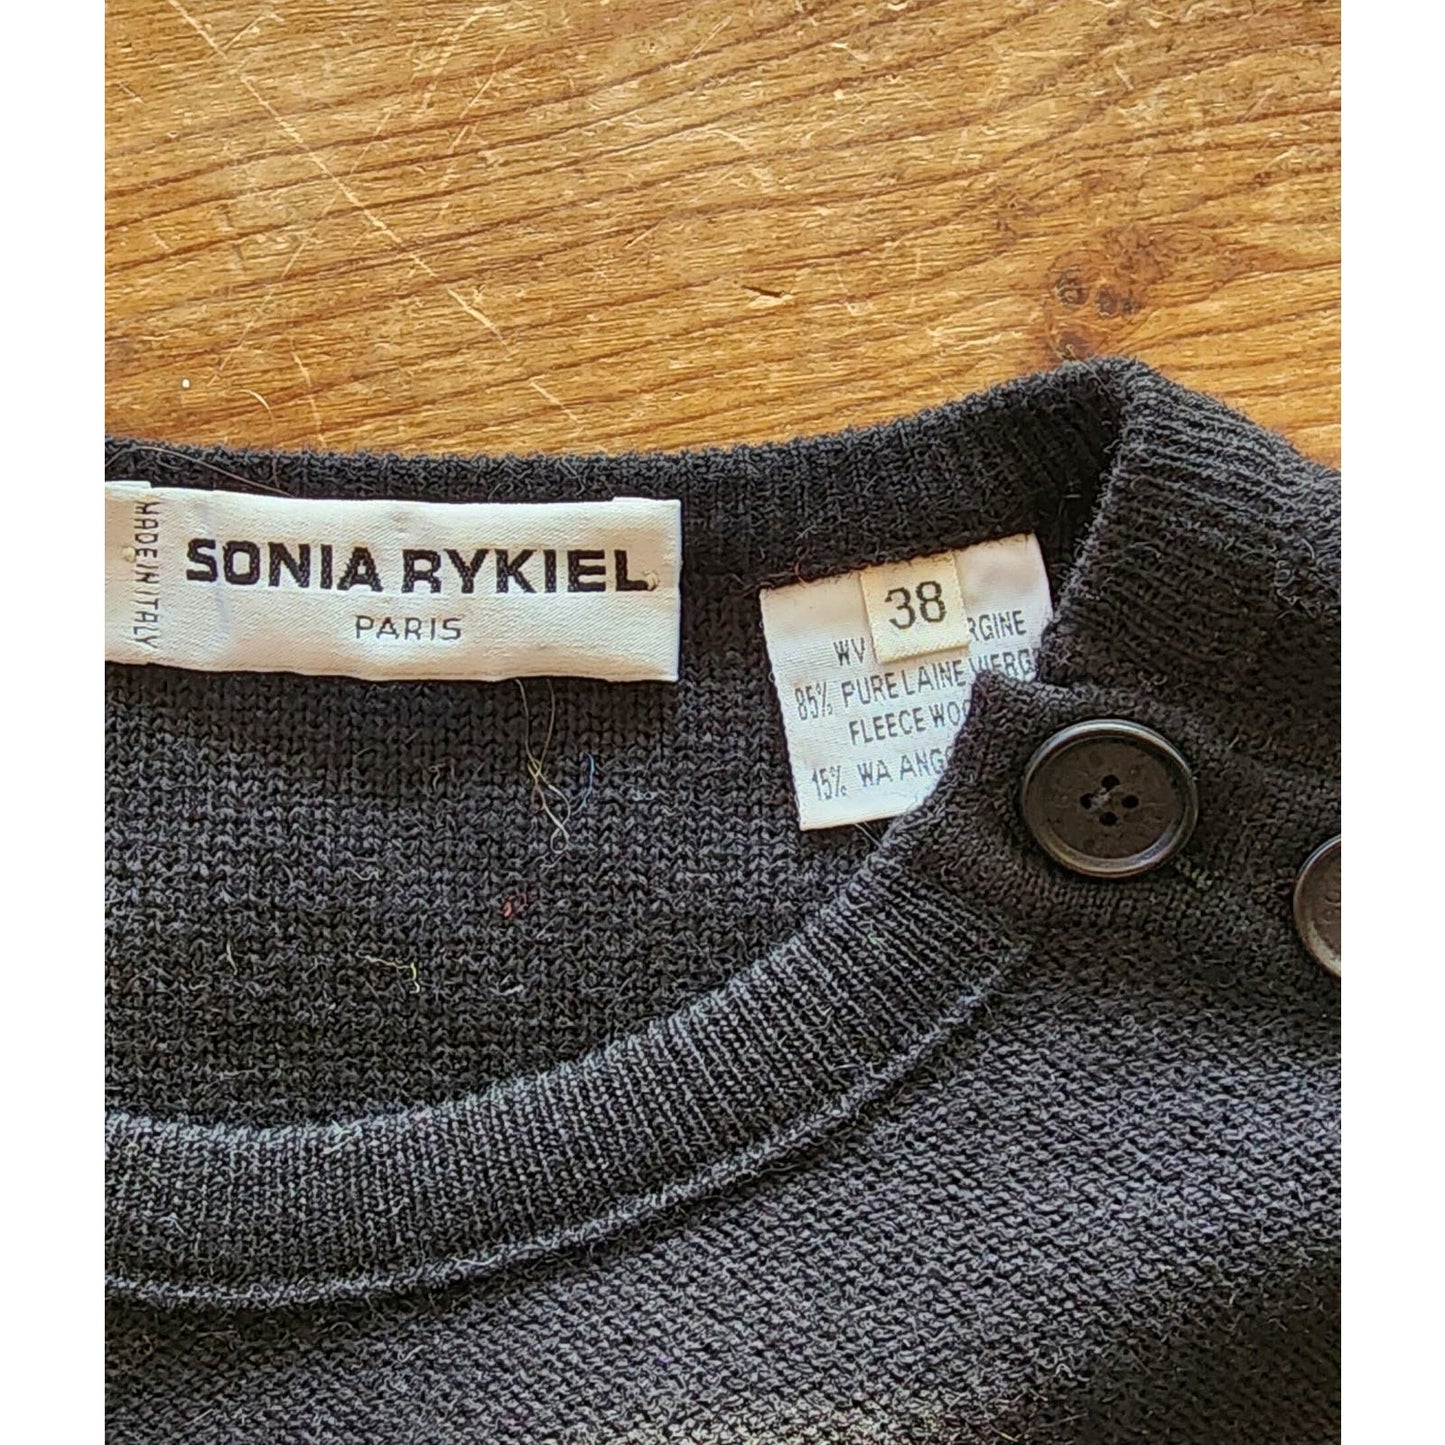 Vintage 90s Sonia Rykiel Black Sweater Buttons at Shoulder